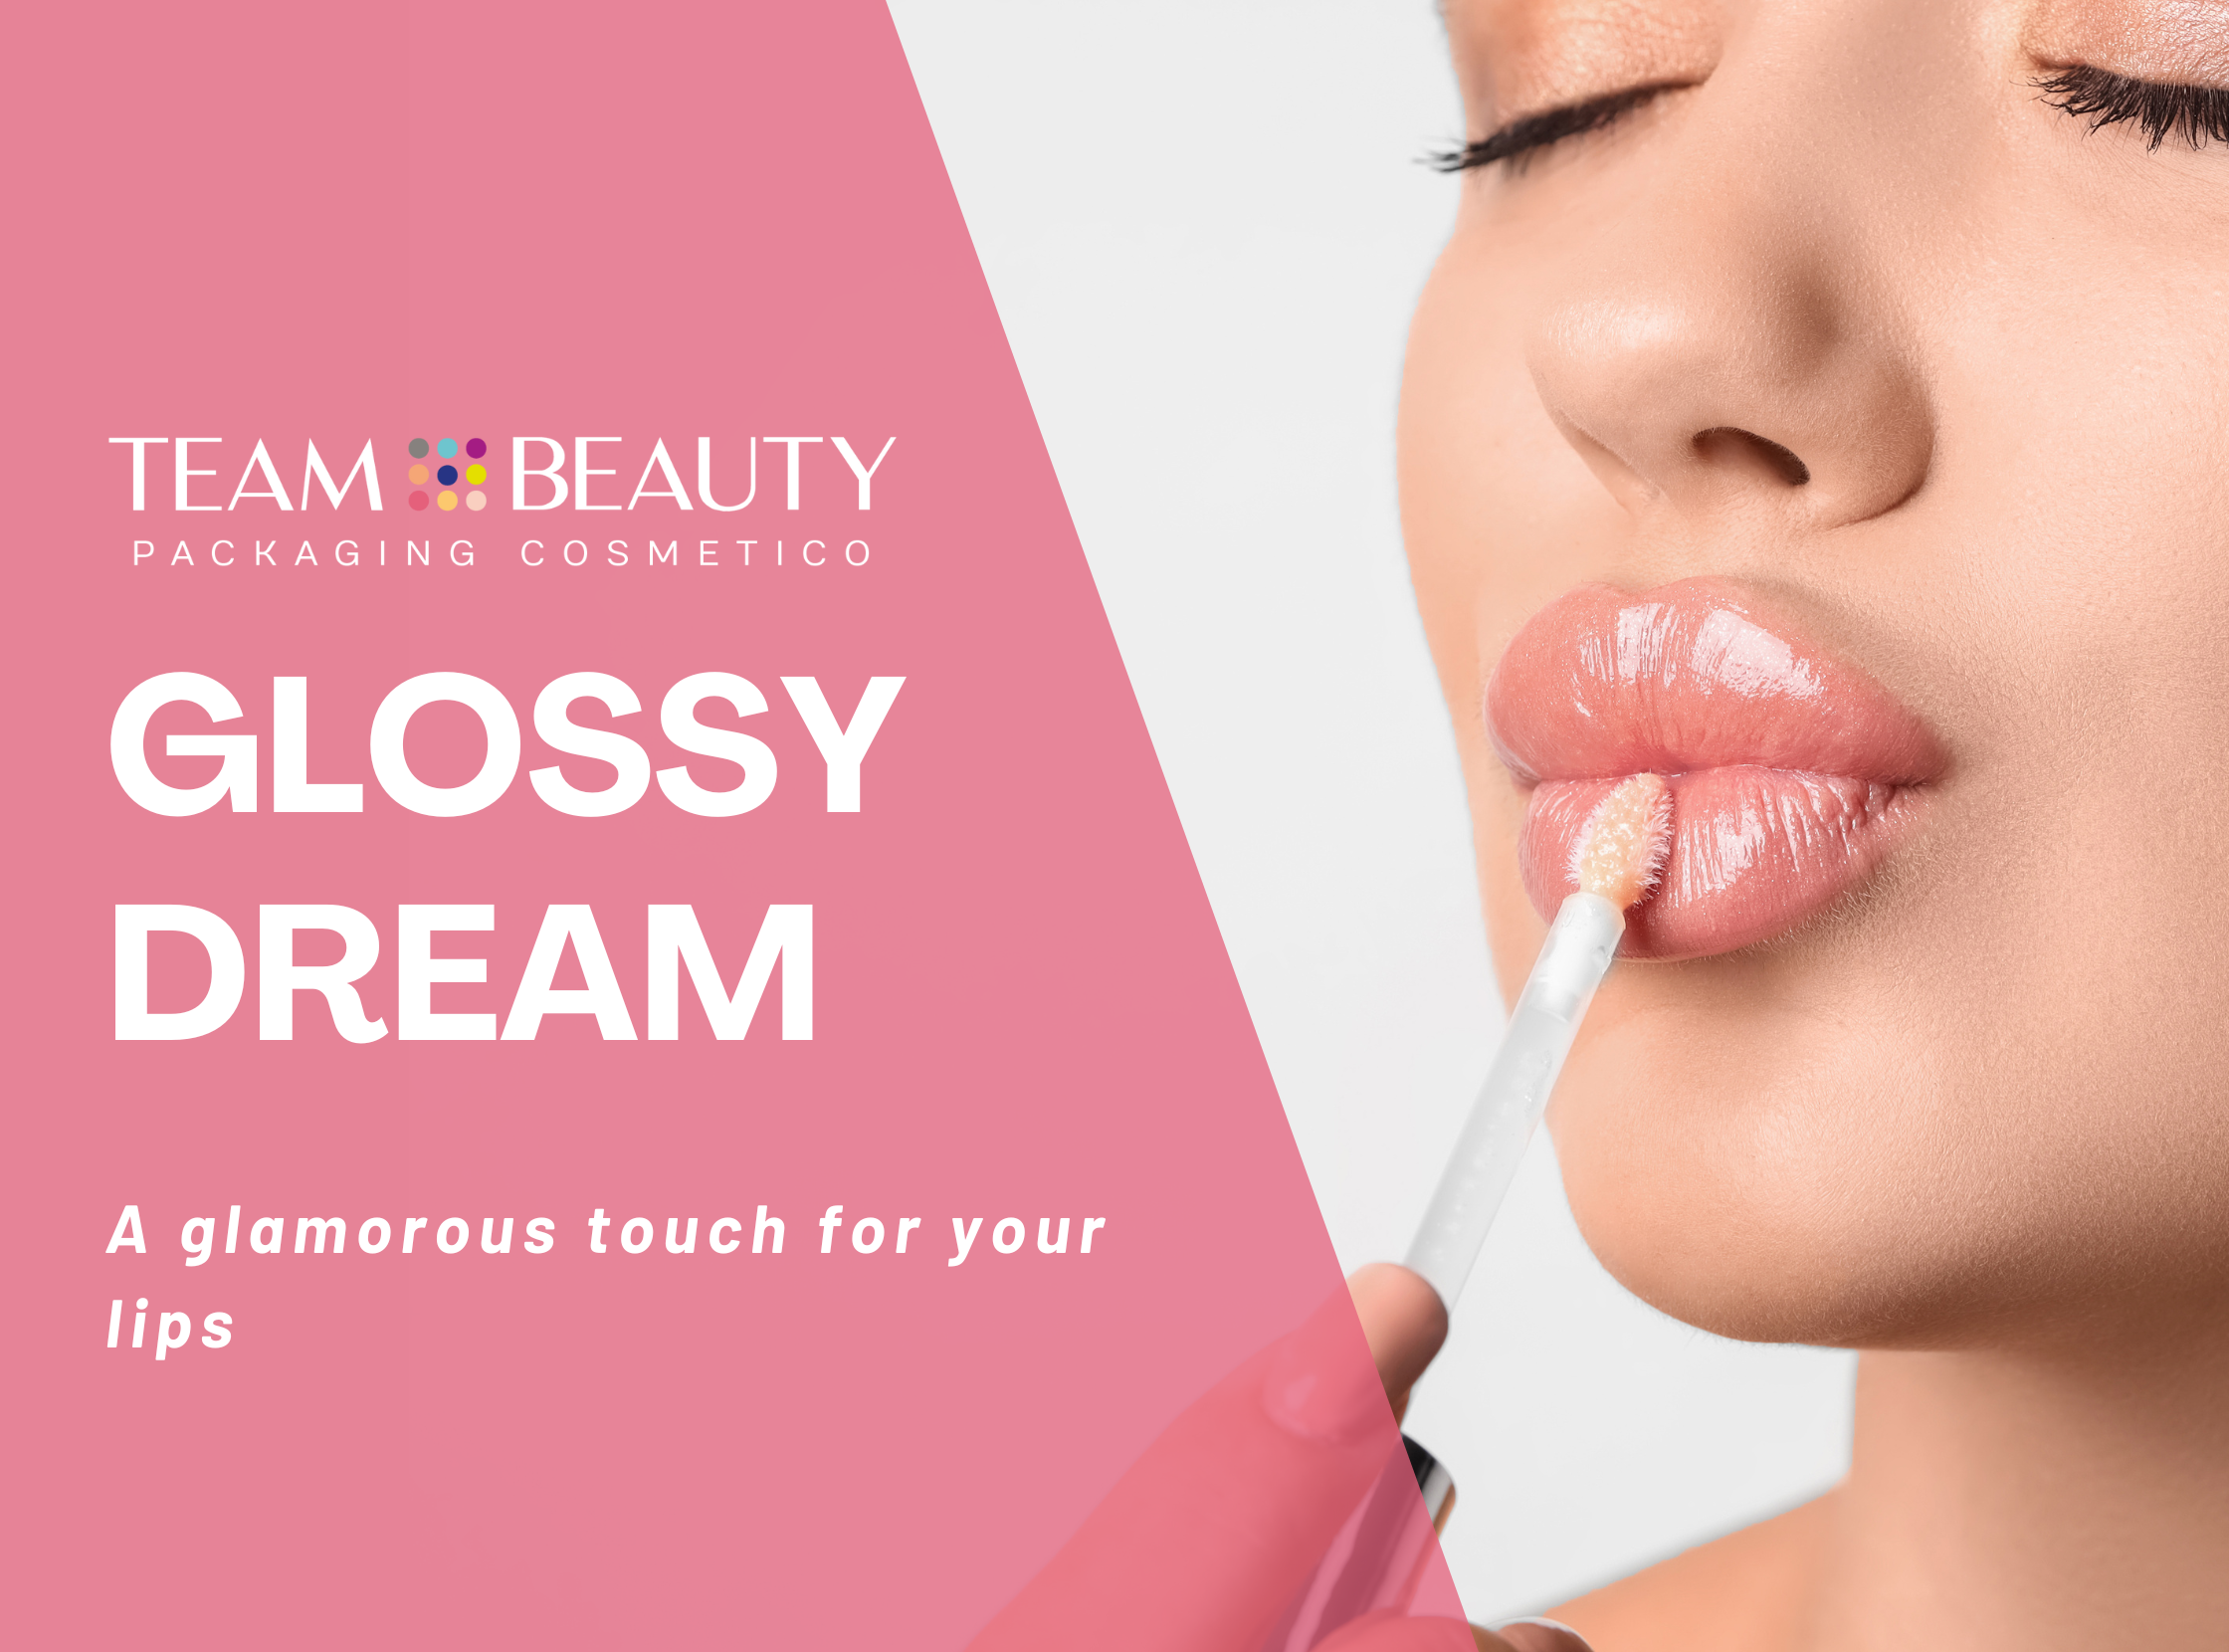 Glossy Dream: a glamorous touch for your lips